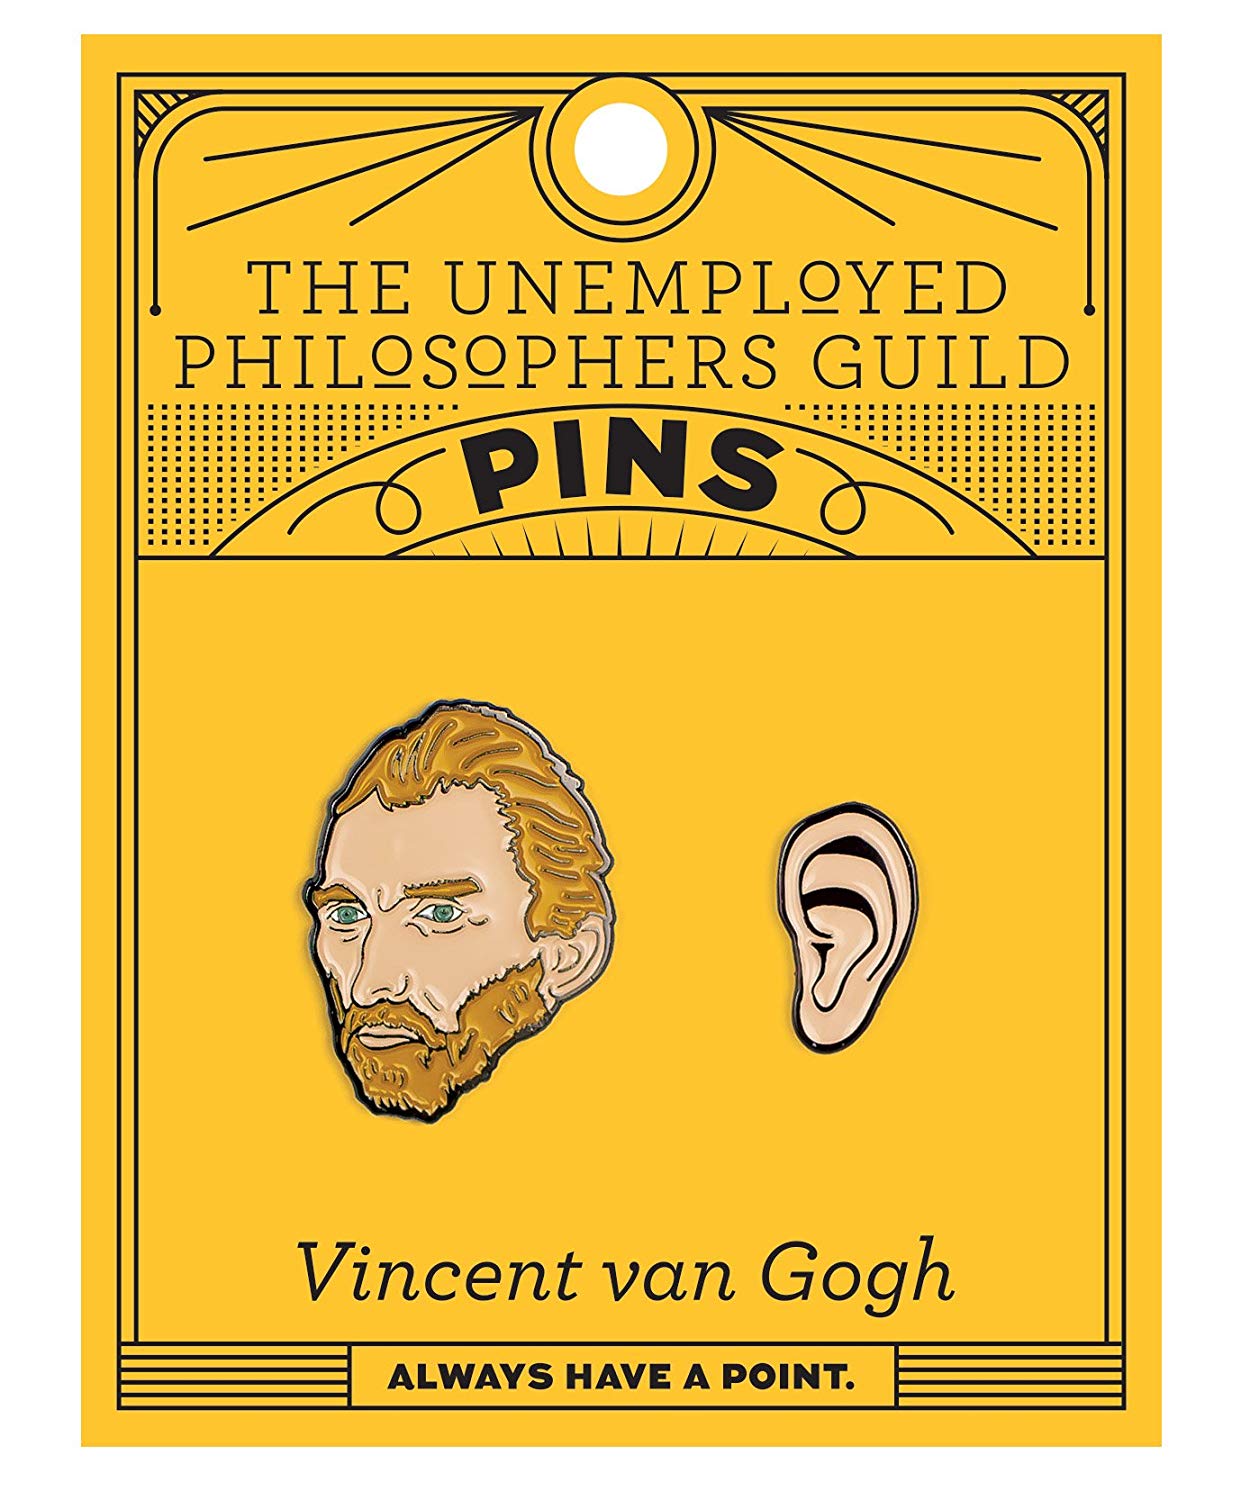 Insigna - Van Gogh and ear | The Unemployed Philosophers Guild